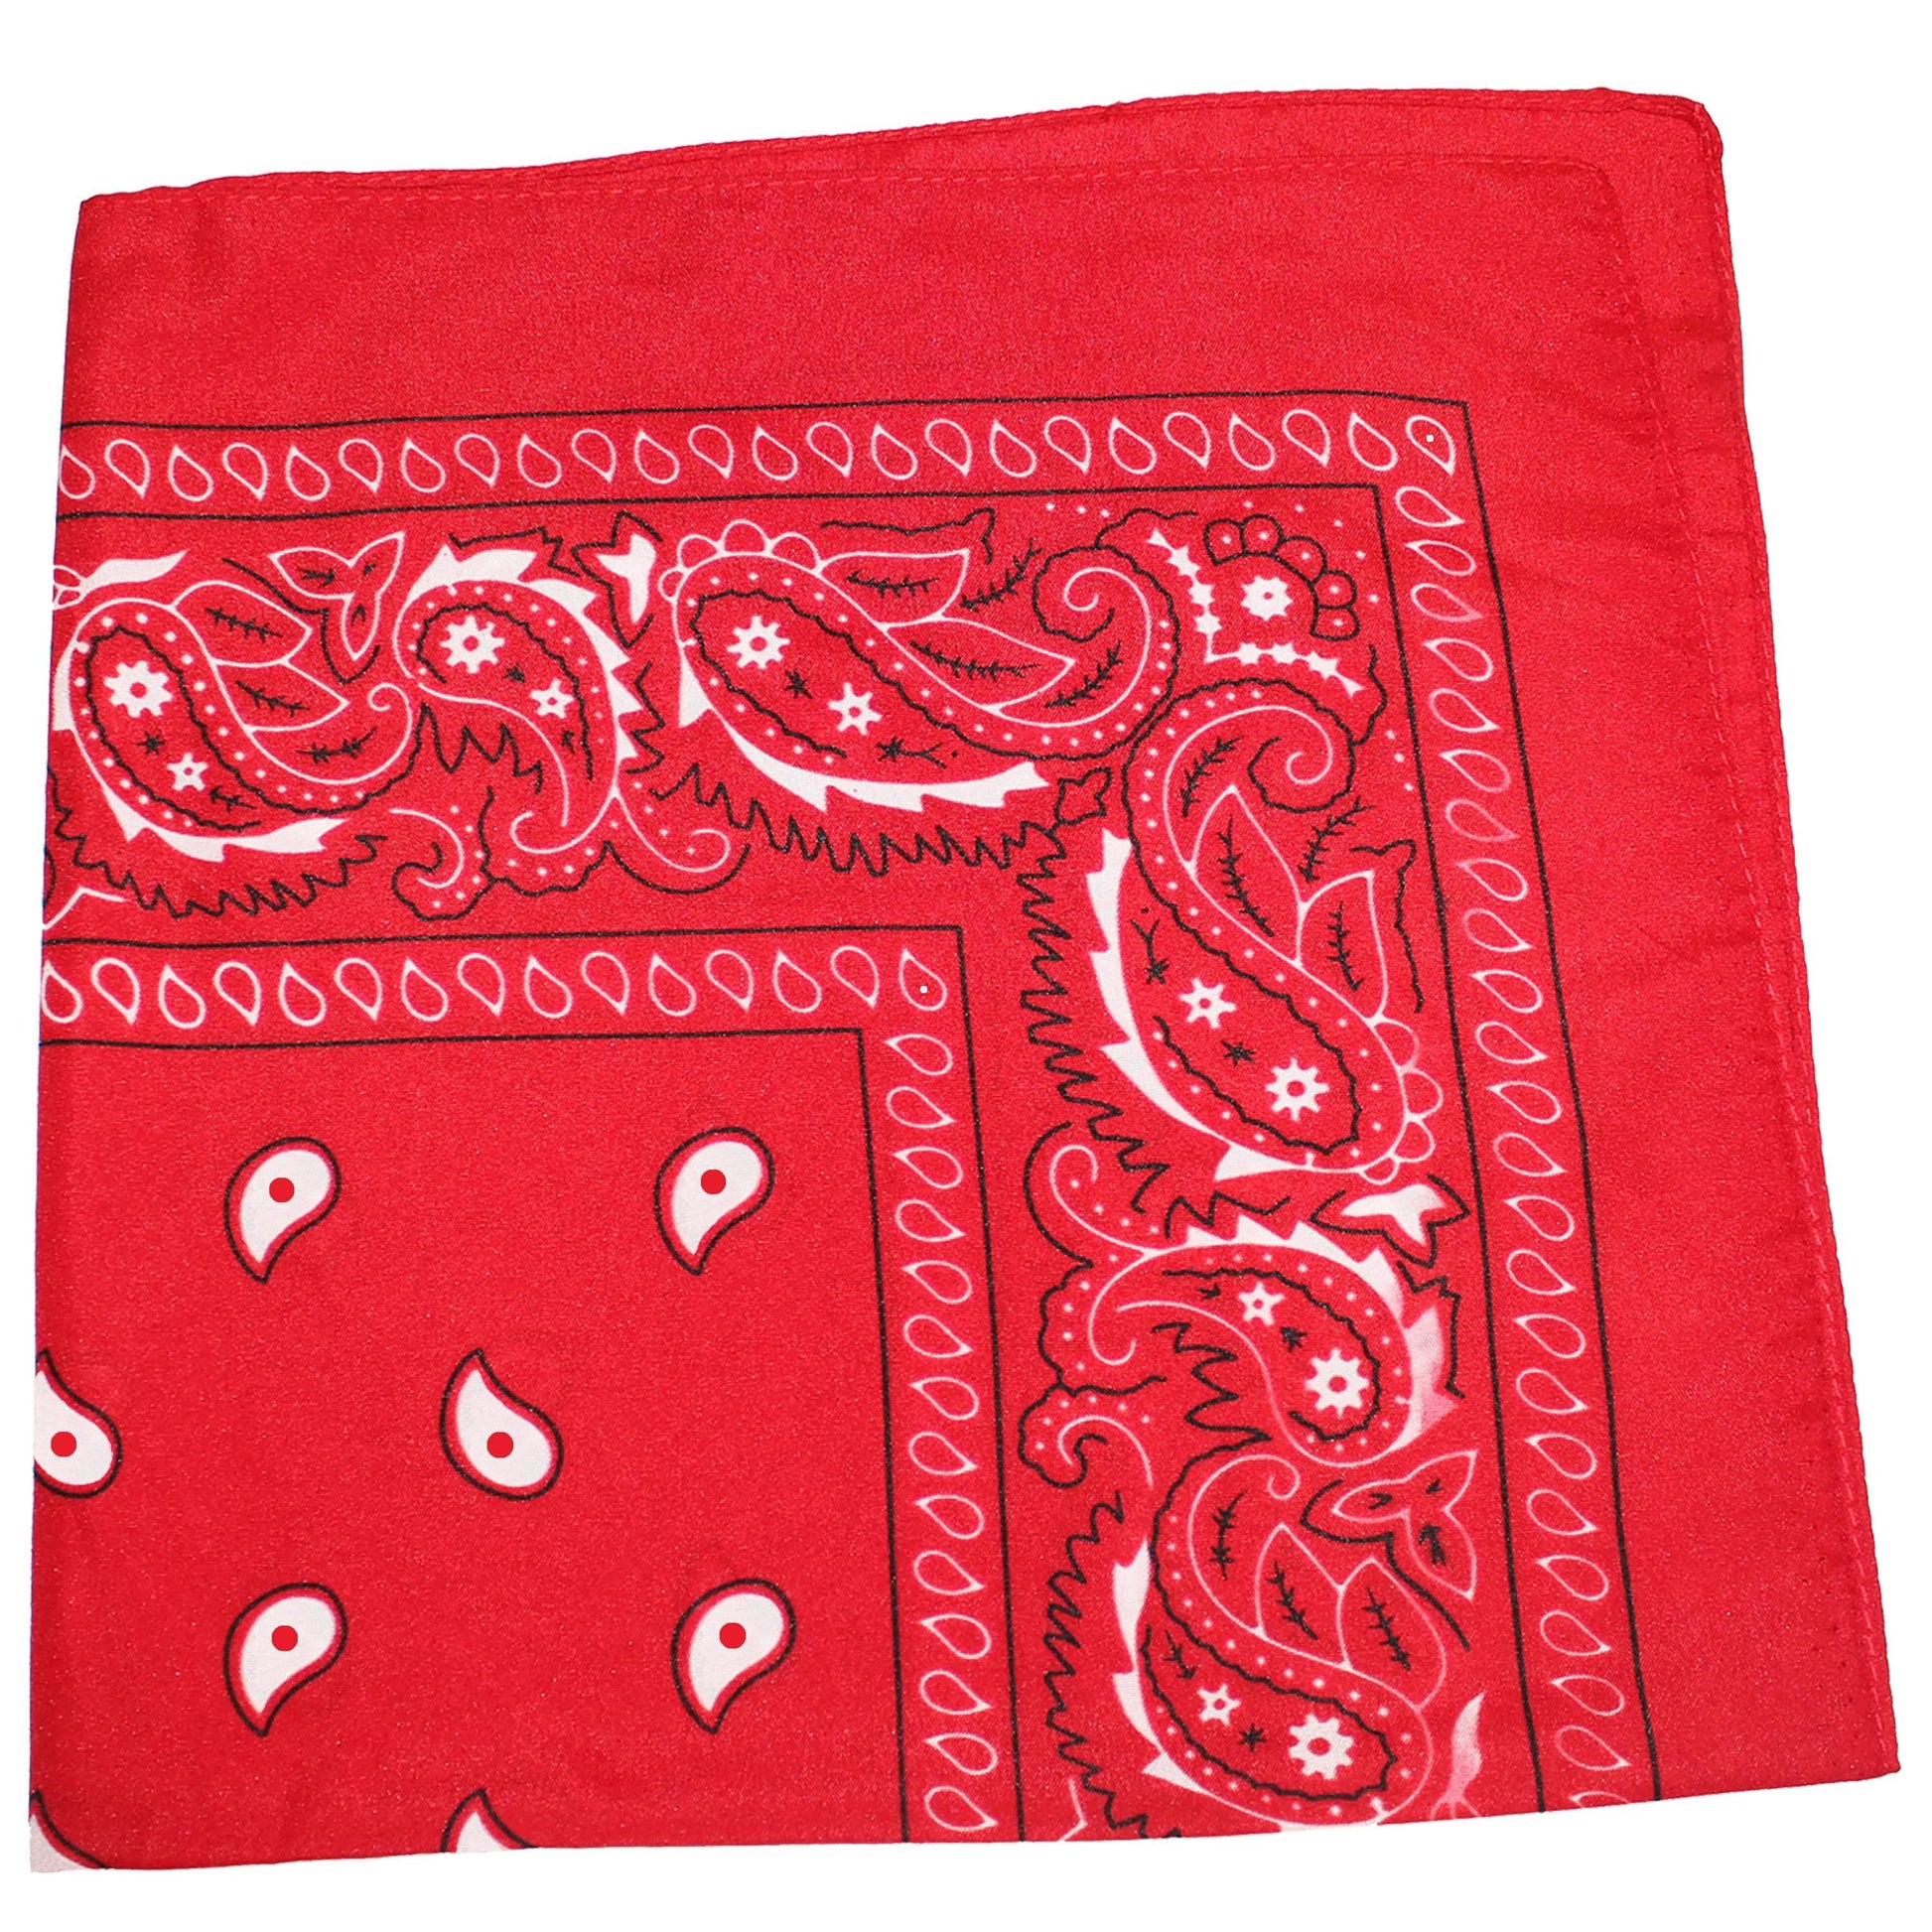 Pack of 5 X-Large Paisley Cotton Printed Bandana - 27 x 27 inches